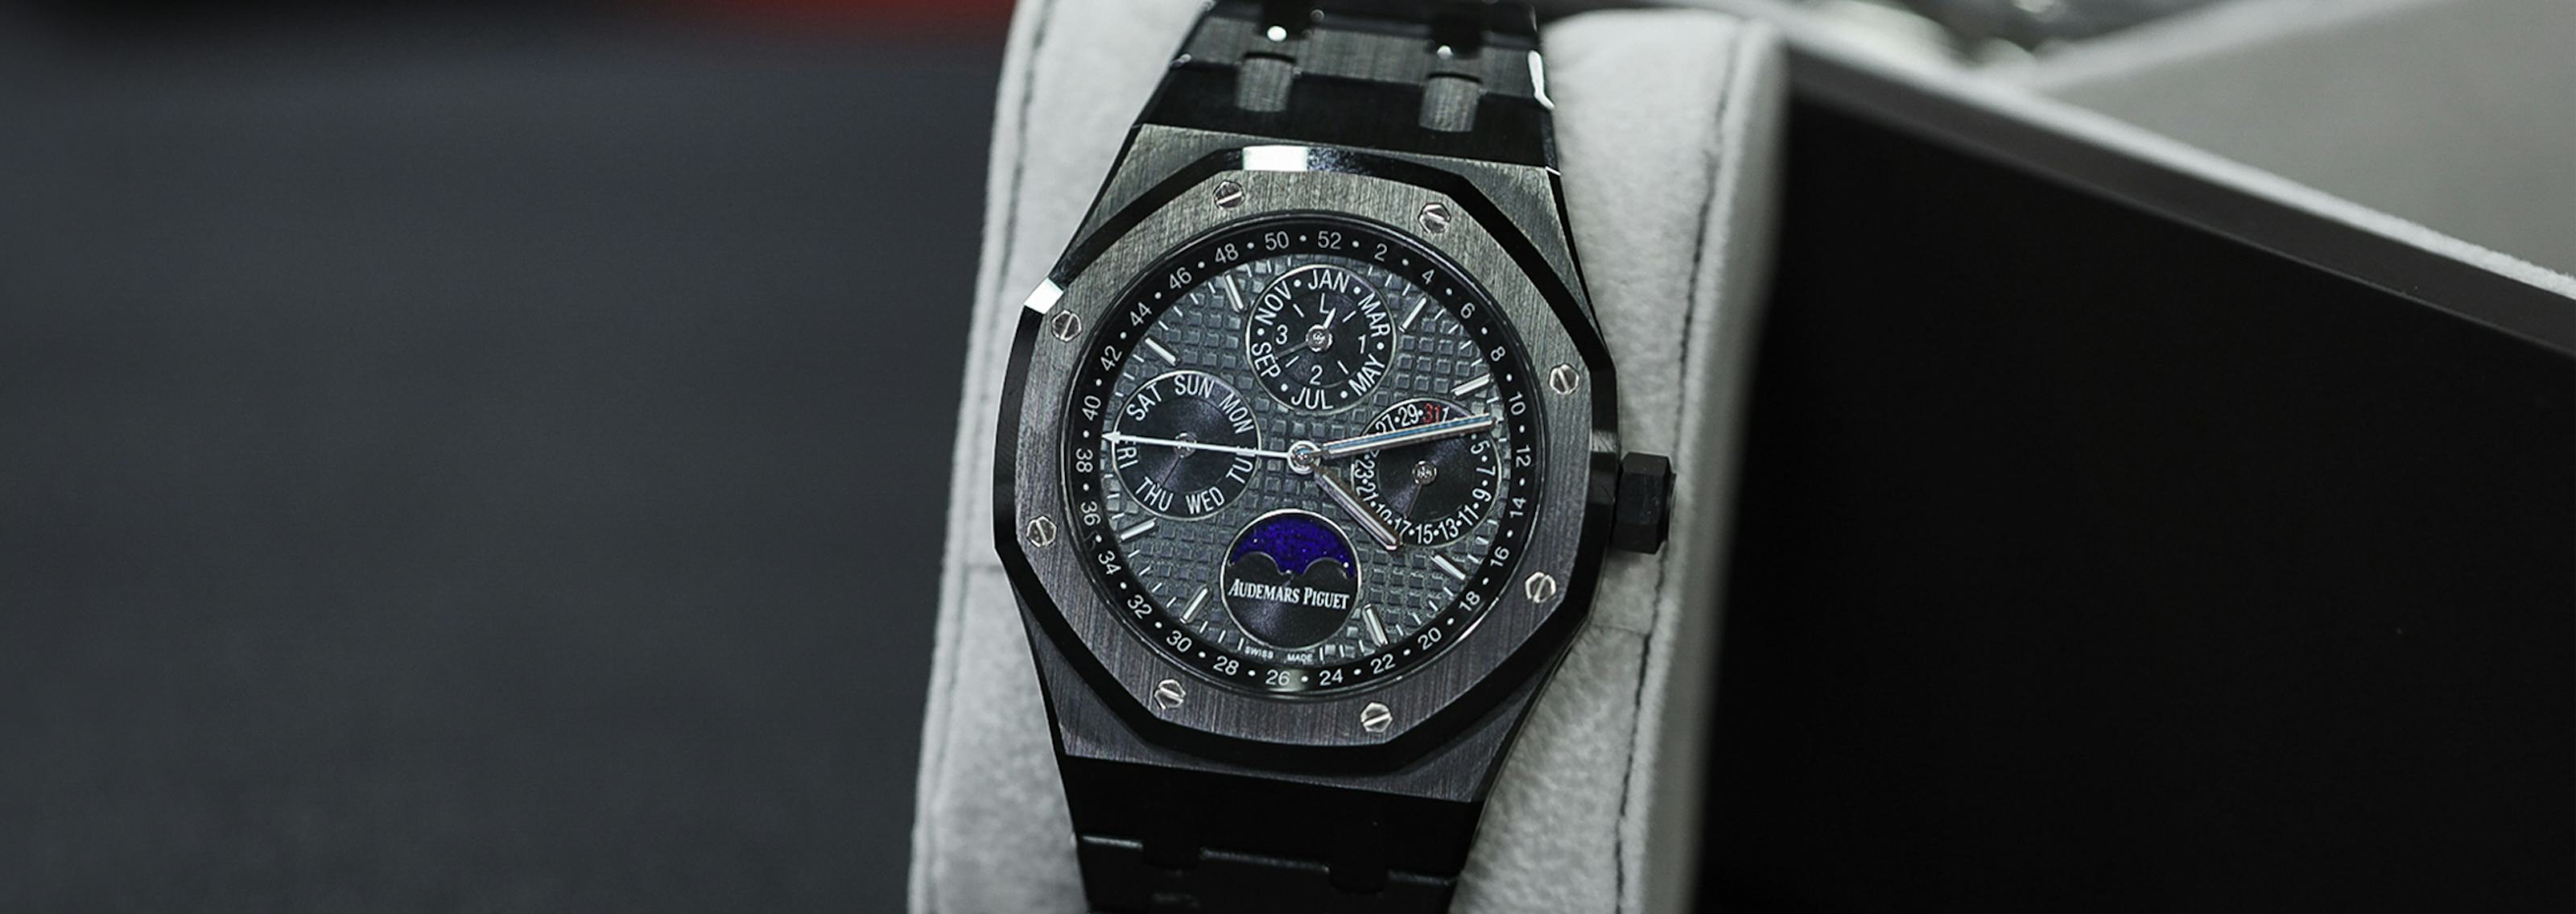 In Conversation: The Art of Collecting Rolex, Richard Mille, Porsche and More